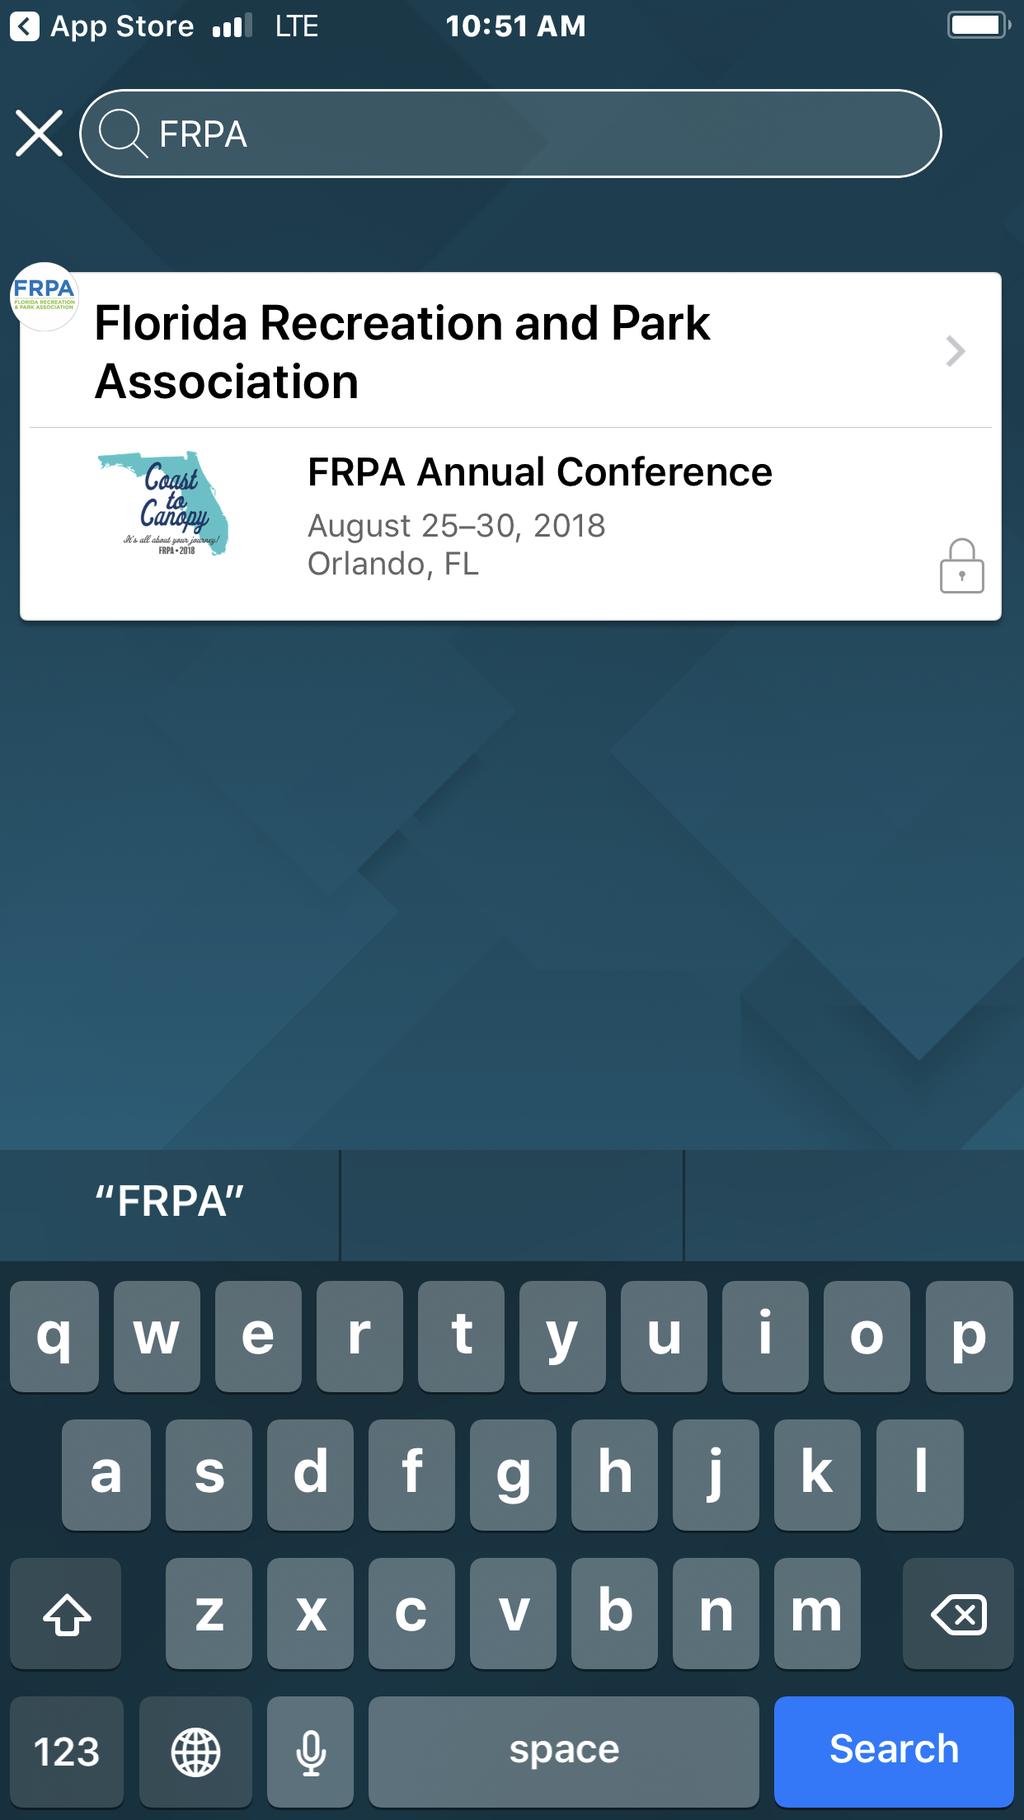 Add FRPA to the App Open and search for